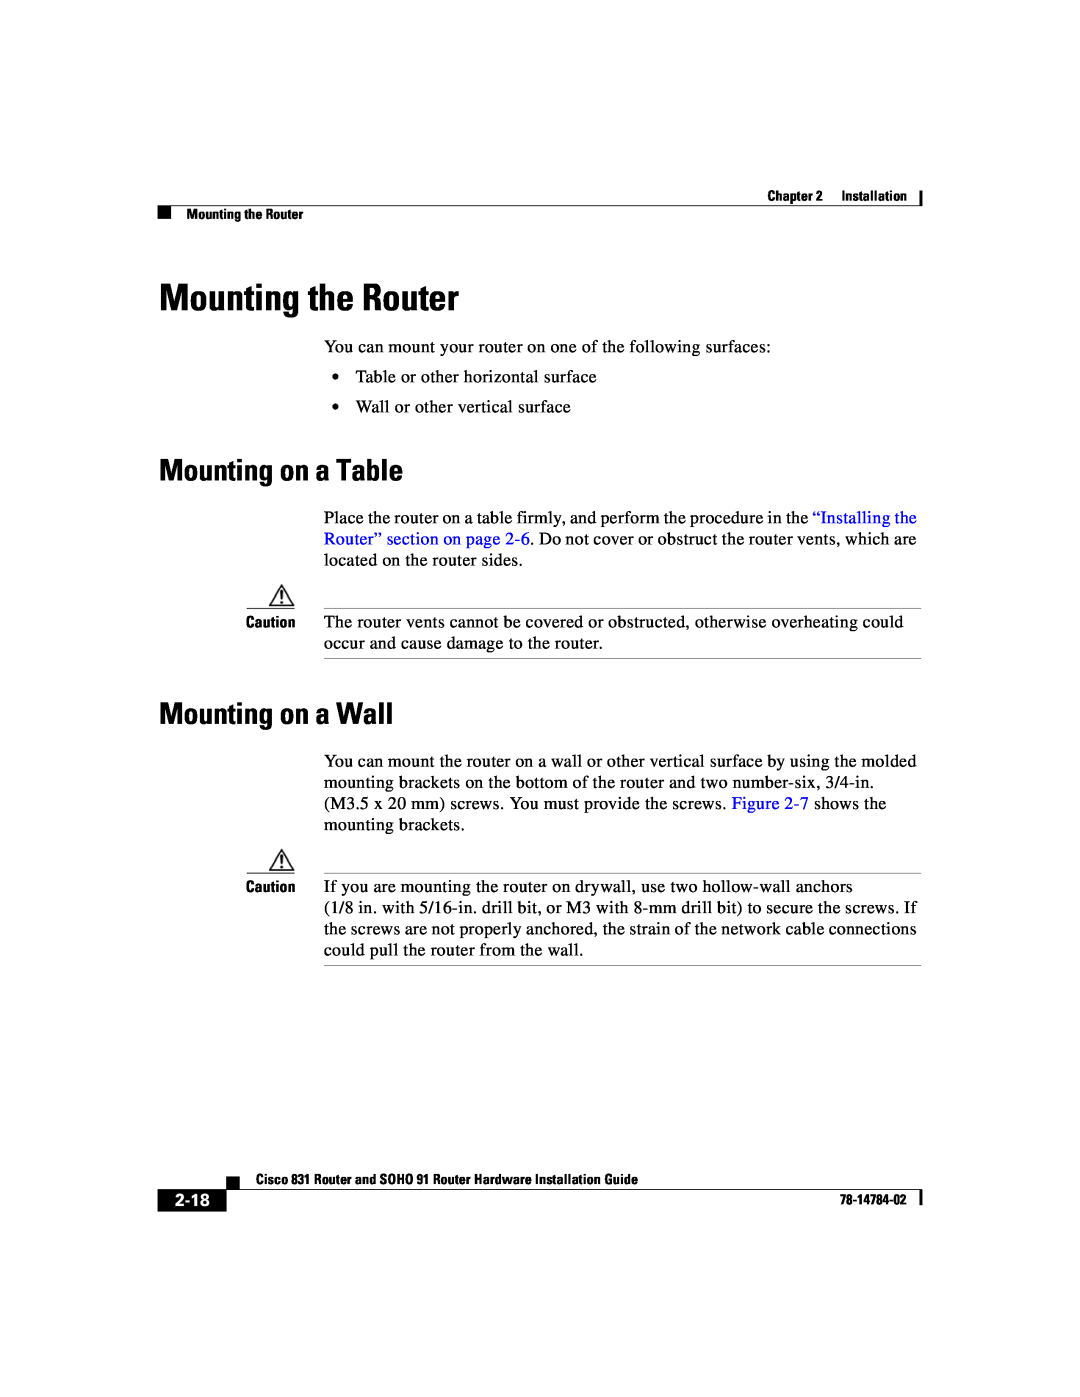 Cisco Systems 78-14784-02 manual Mounting the Router, Mounting on a Table, Mounting on a Wall, 2-18 